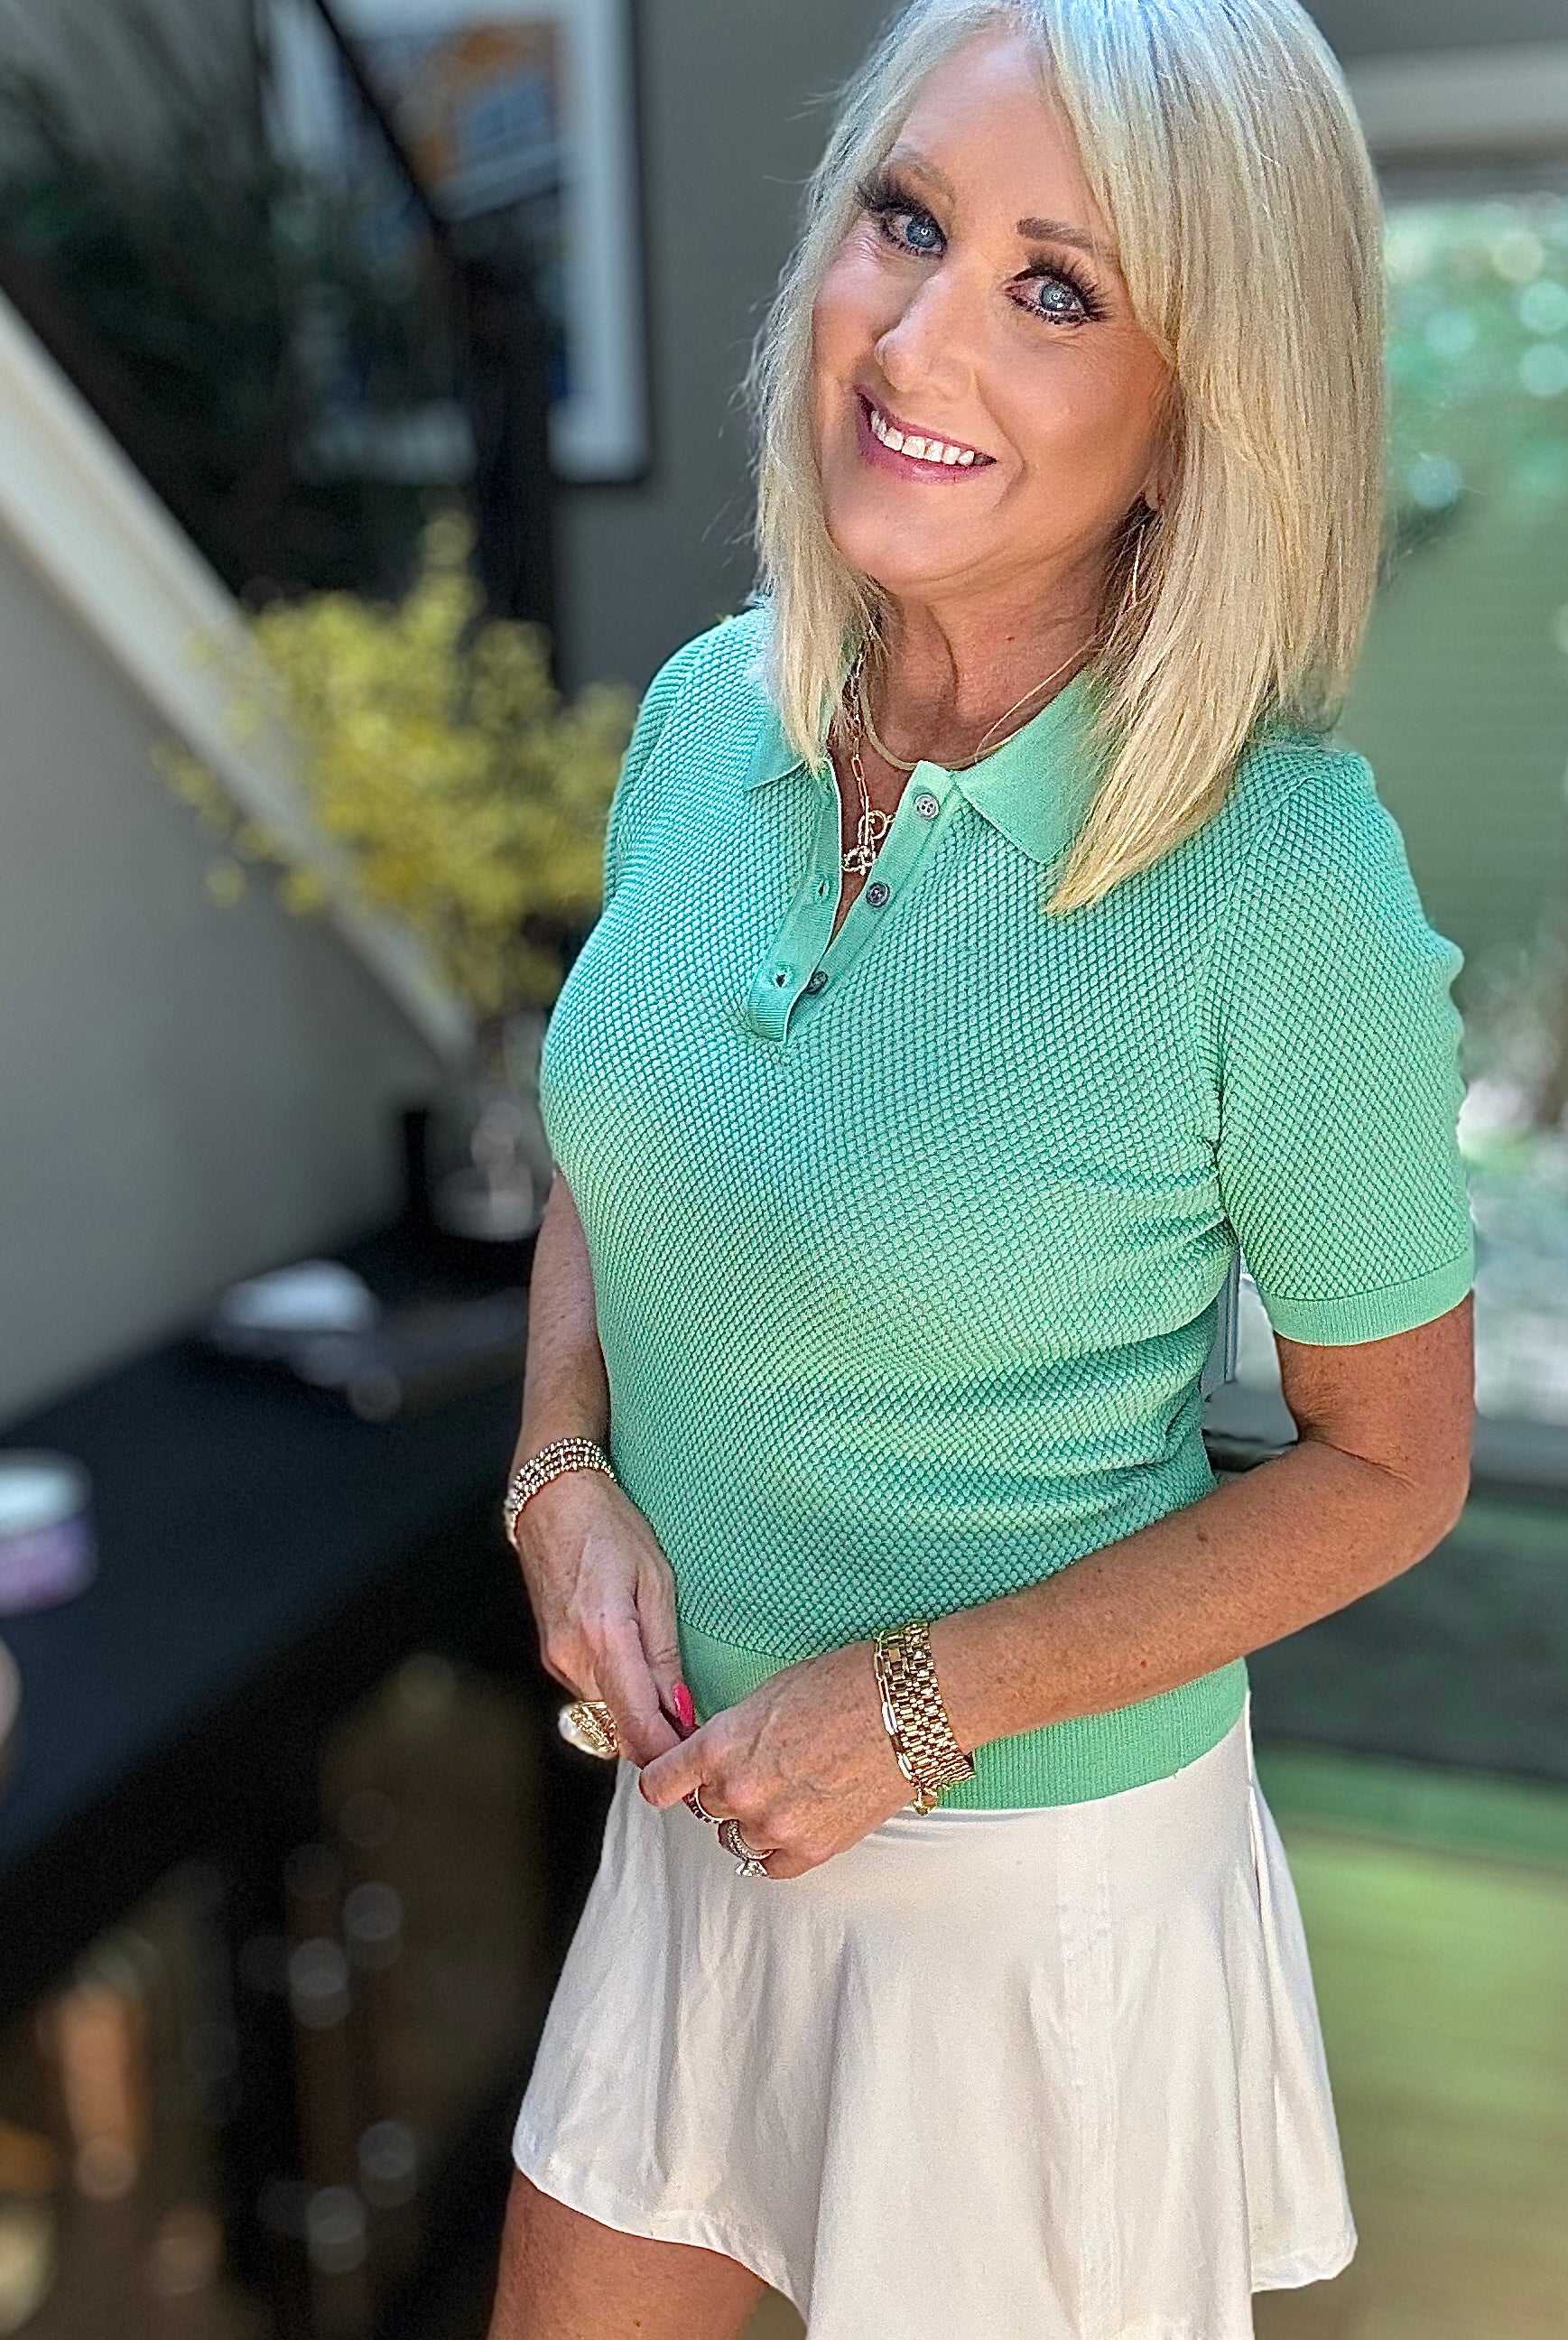 Soft Thermal Texture Two Colors Thread Polo Shirt Sweater in Sage-Short Sleeves-Ave Shops-Urban Threadz Boutique, Women's Fashion Boutique in Saugatuck, MI